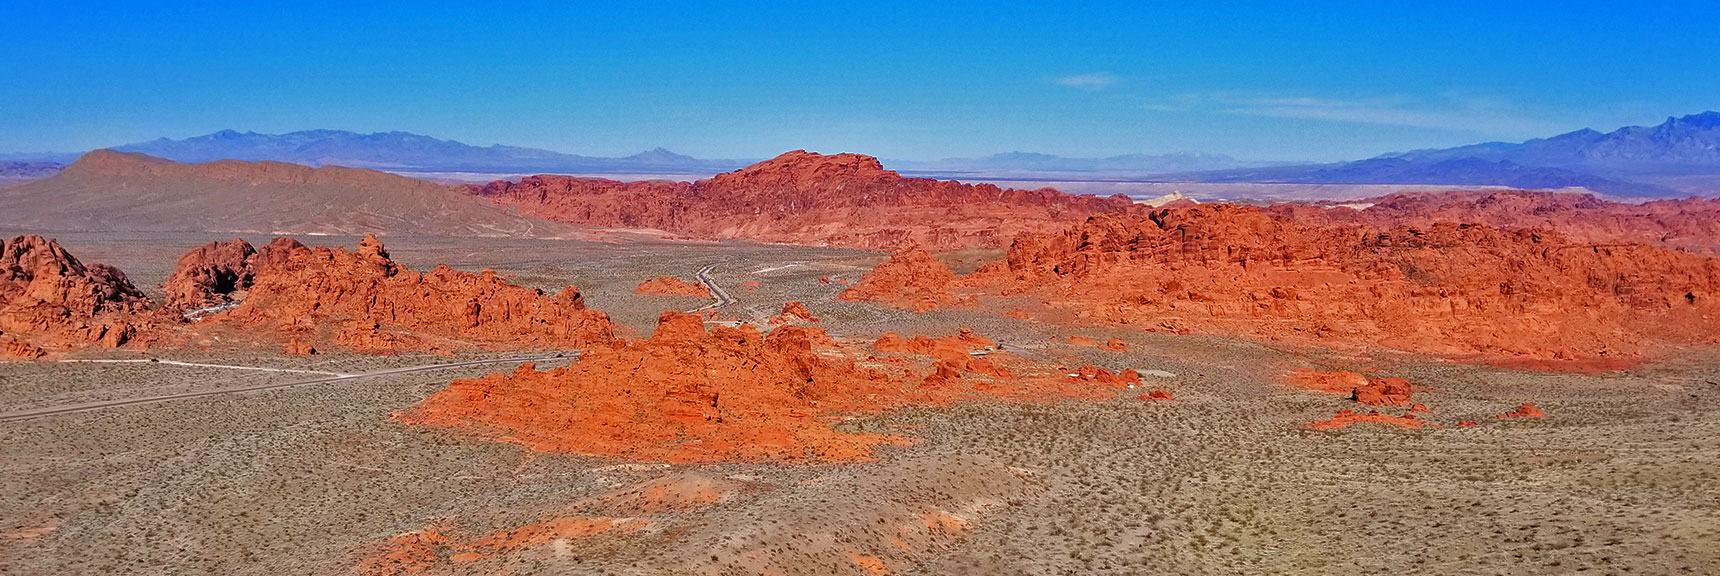 Panorama | Valley of Fire State Park, Nevada